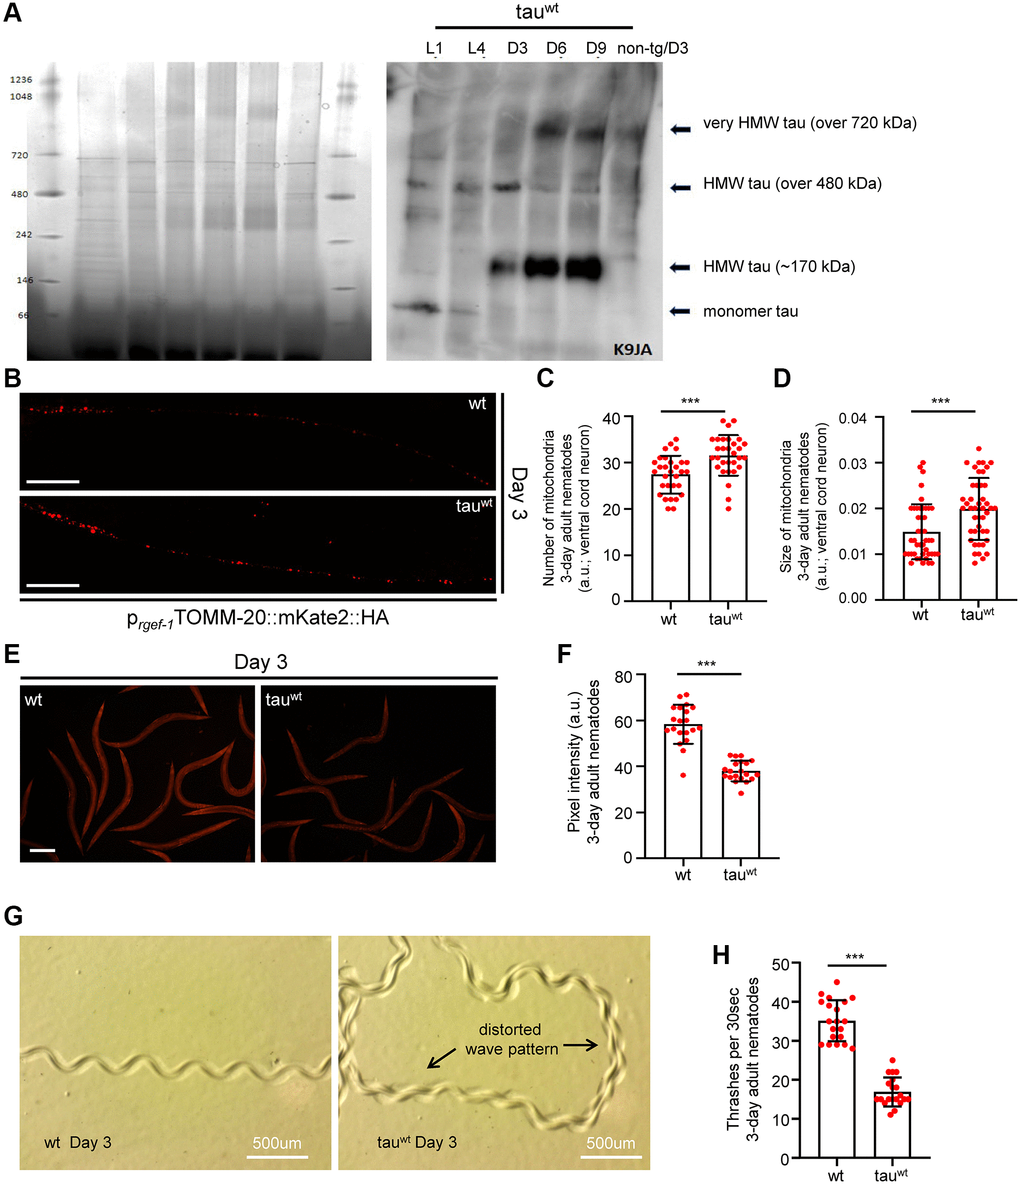 Impaired mitochondrial homeostasis and motility defects in tauwt-expressing 3-day adult animals. (A) Age-dependent accumulation of wild type tau protein in neuronal cells (heigh molecular weight; HMW). (B) Representative fluorescent images of transgenic nematodes expressing pan-neuronally mitochondria-targeted mKate2::HA. Scale bar, 20 μm. Tauwt-expressing 3-day-adult nematodes display (C) increased mitochondrial population and (D) smaller organelle compared to their wild type counterparts (n = 30; ***P t-test). (E, F) Tauwt expressing nematodes display decreased mitochondrial membrane potential (n = 40; ***P t-test). Scale Bar, 100 μm. (G) Representative images of 3-day adult wild type and tauwt expressing nematodes tracks. (H) Body bends of 3-day adult wild type and tauwt- animals per 30 seconds in M9 buffer (n = 20; ***P t-test).